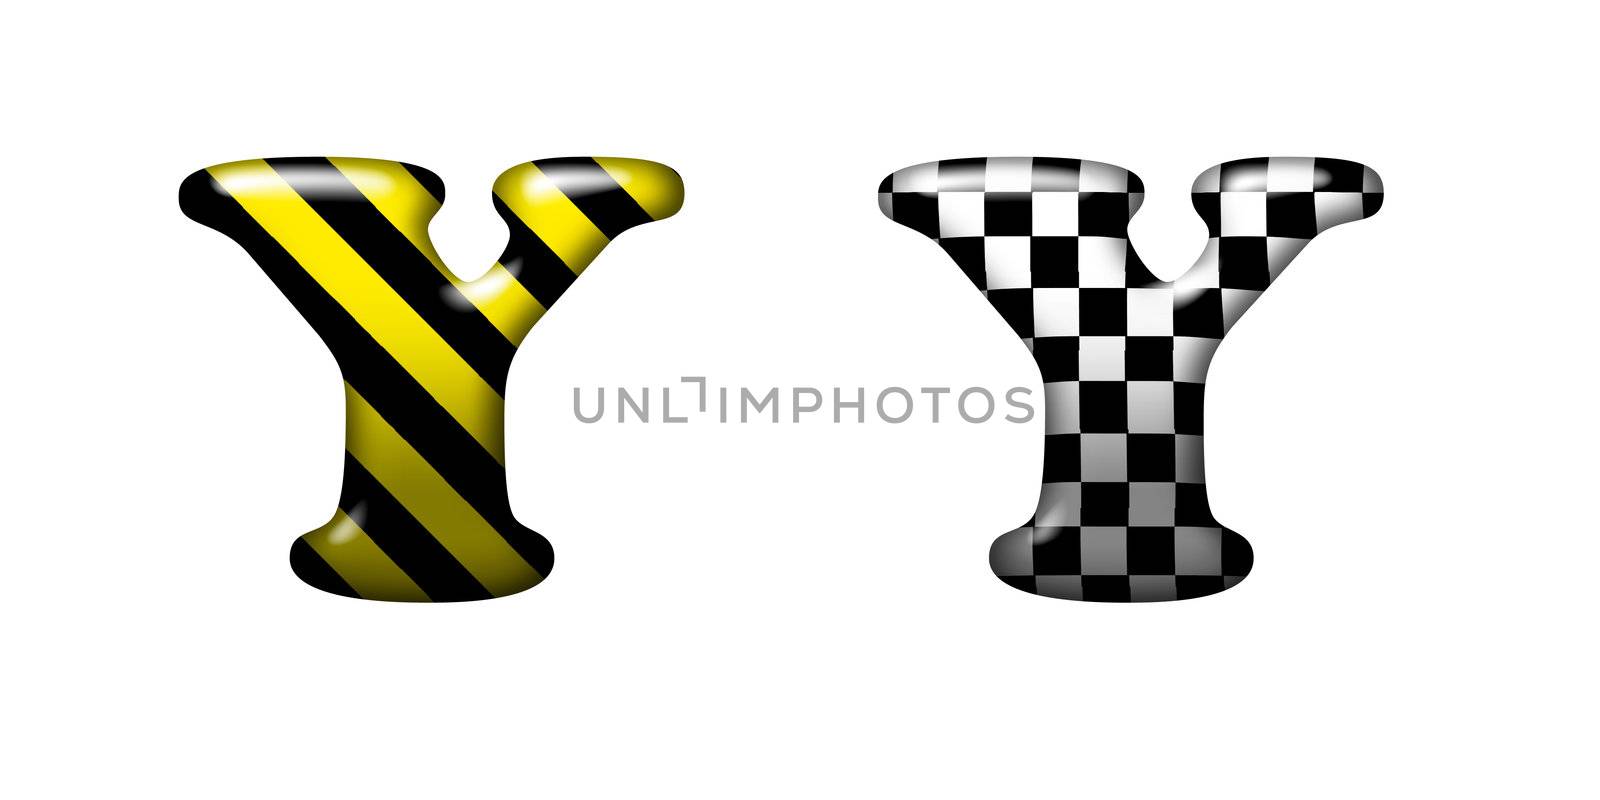 Exclusive collection letters with danger stripes and chess squar by mozzyb